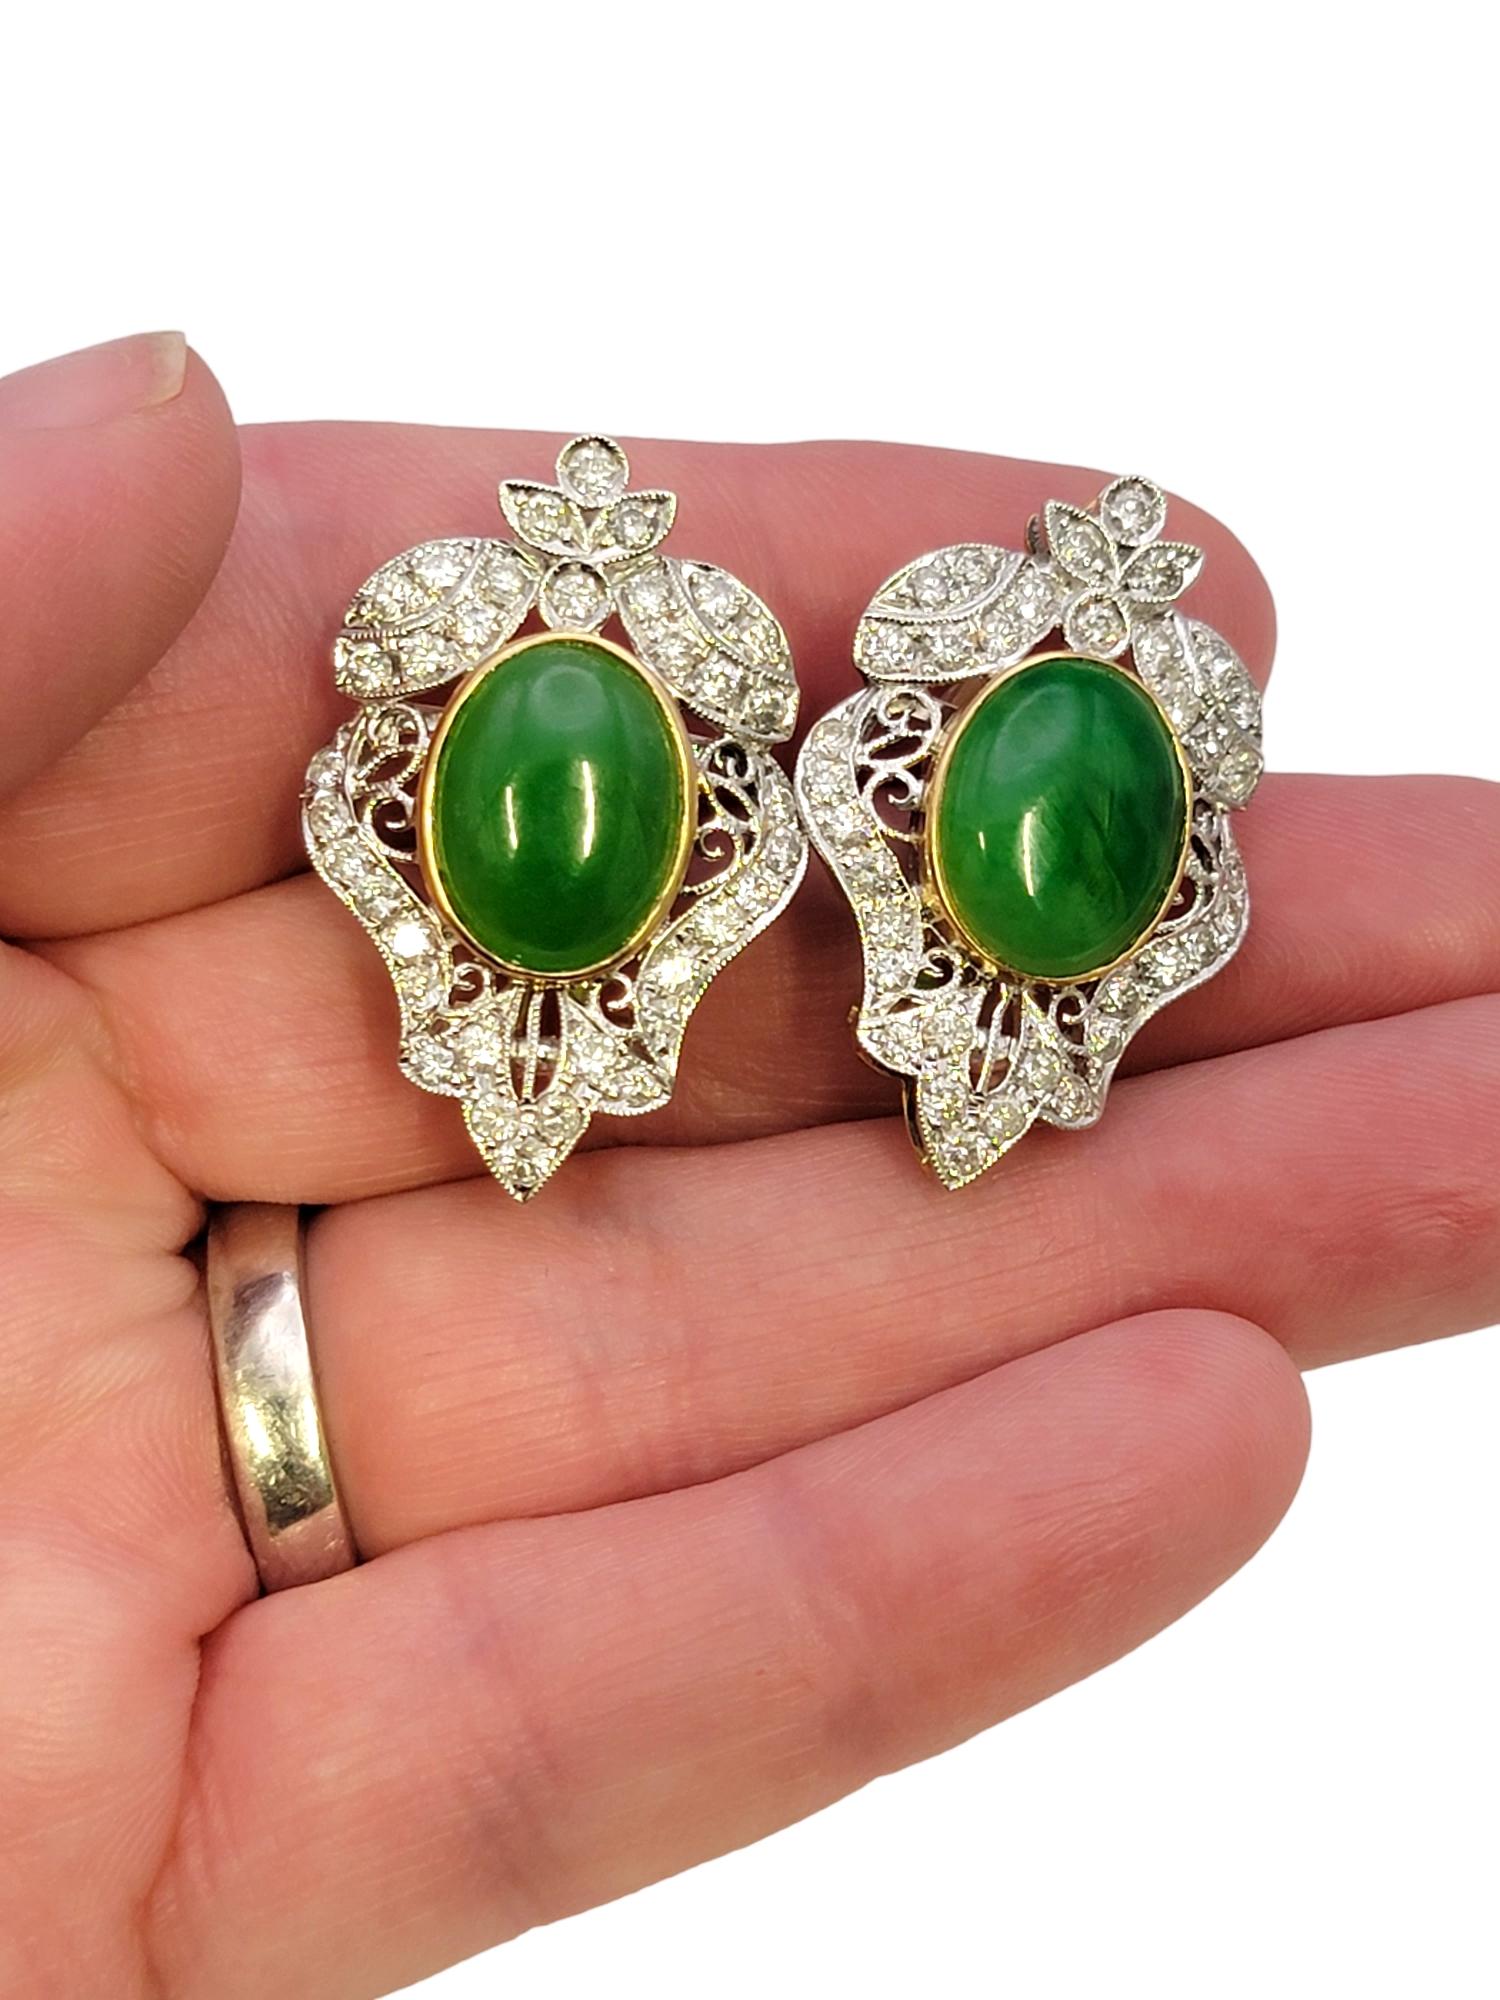 Vintage Style Cabochon Jade and Pave Diamond Pierced Earrings in 18 Karat Gold For Sale 5